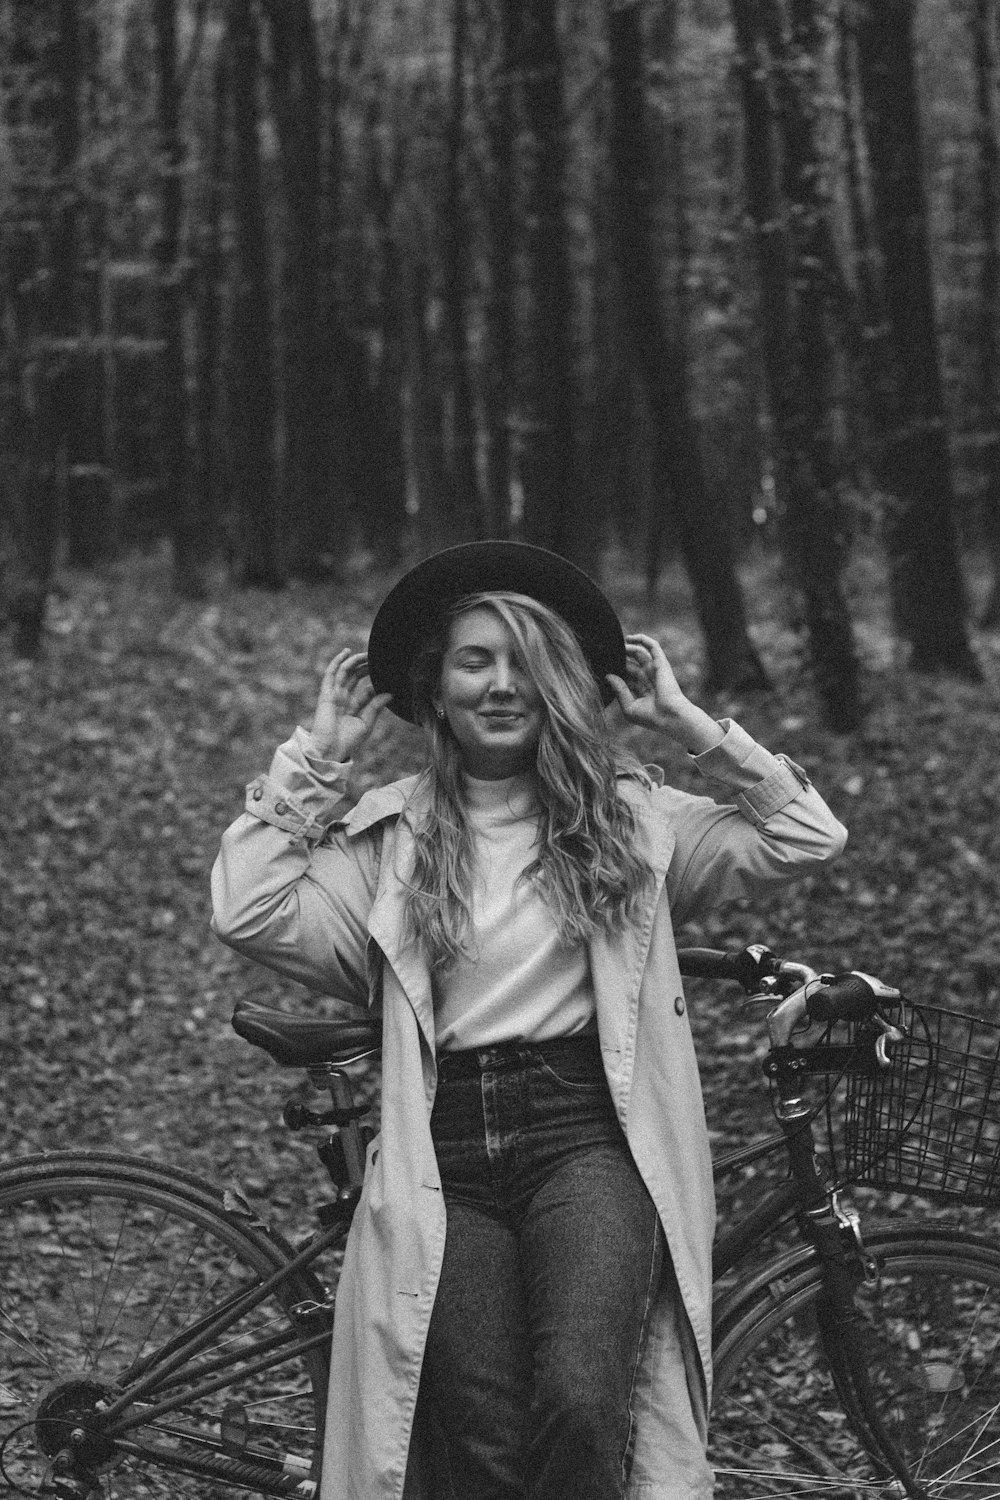 grayscale photo of woman in jacket and denim jeans standing beside bicycle